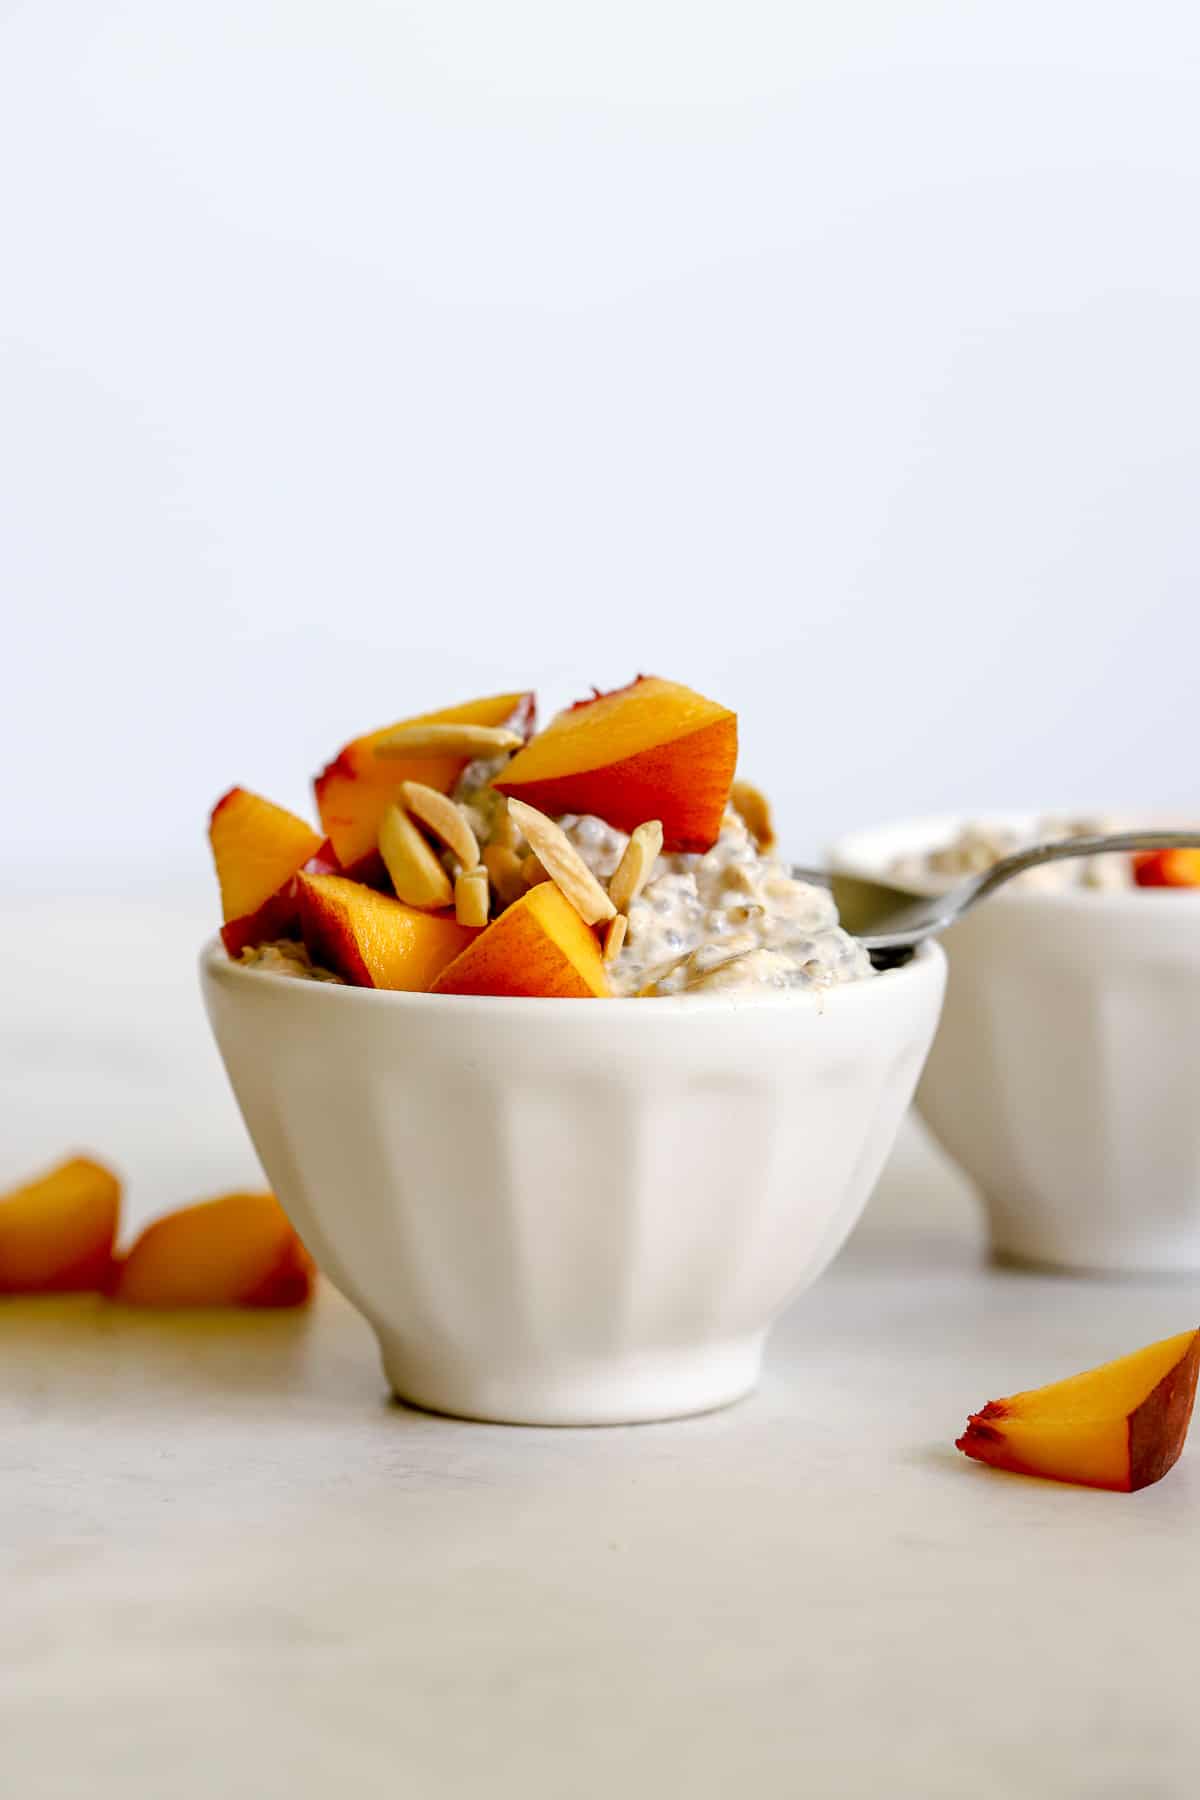 Peach pie overnight oats in small white bowl with diced fresh peaches, slivered almonds, and a dusting of cinnamon, on light gray surface with a few diced peaches on the side